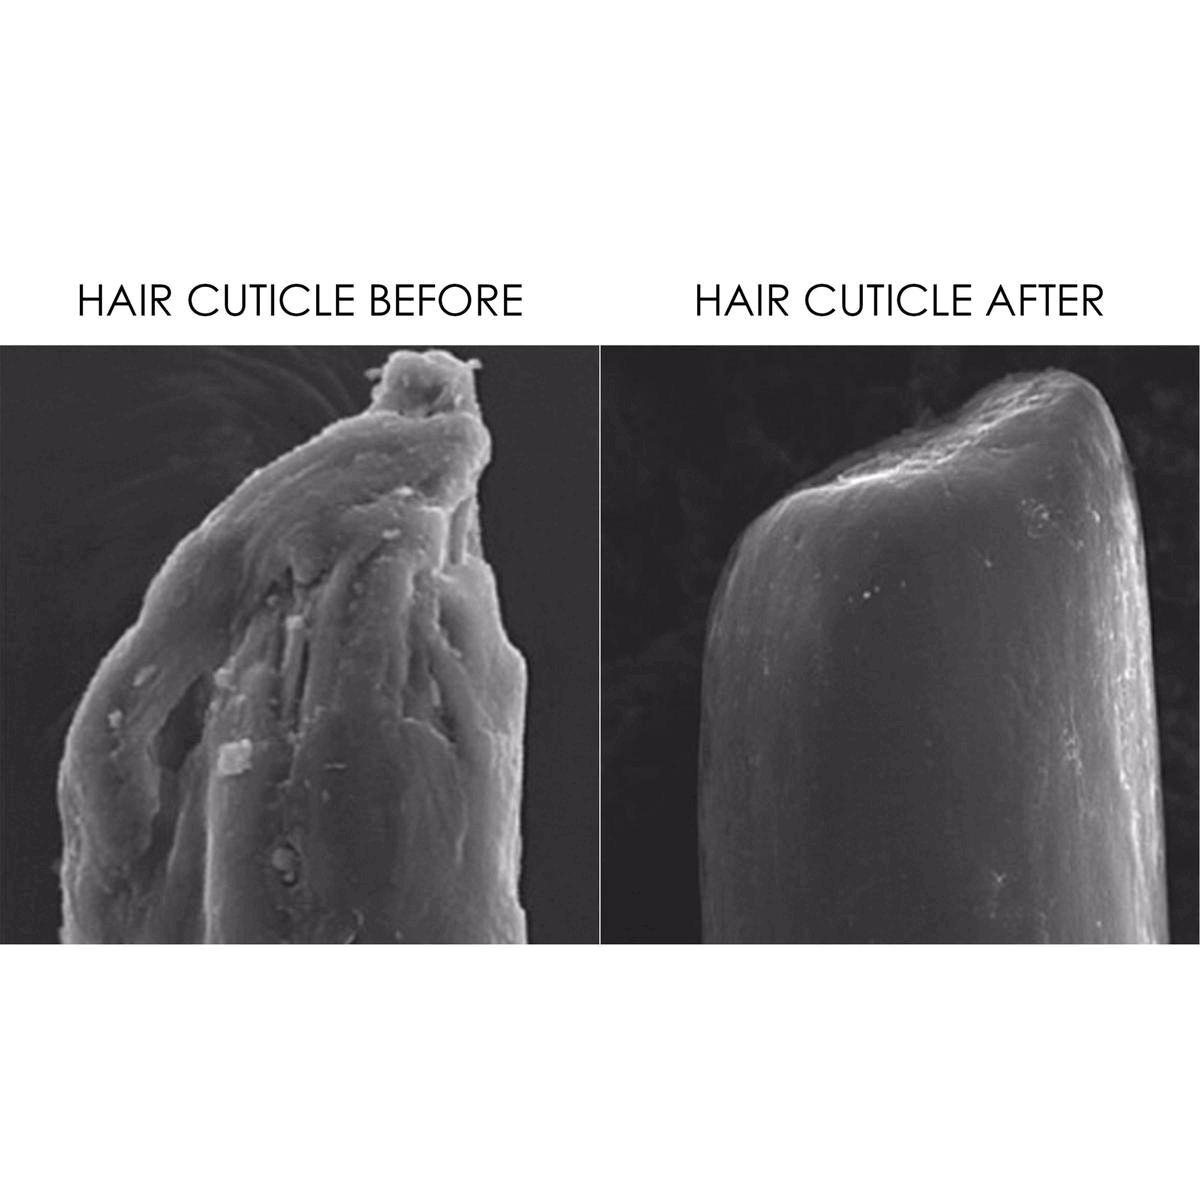 Image 1, hair cuticle before and after. Image 2, product benefits. Image 3, the environment comes first